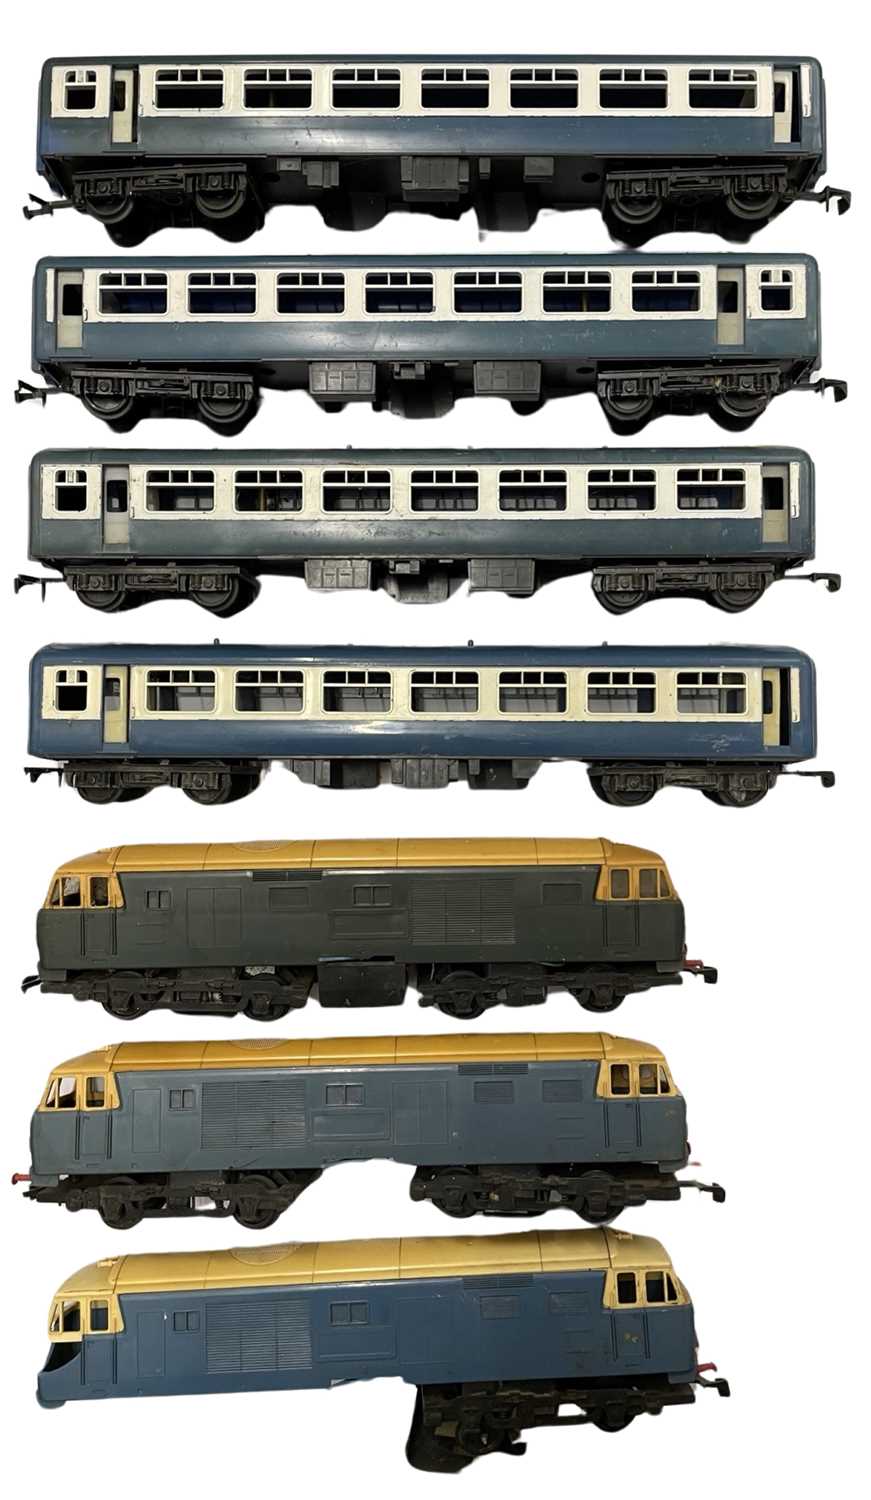 A collection of various unbranded 0 gauge rail corridors / carriages